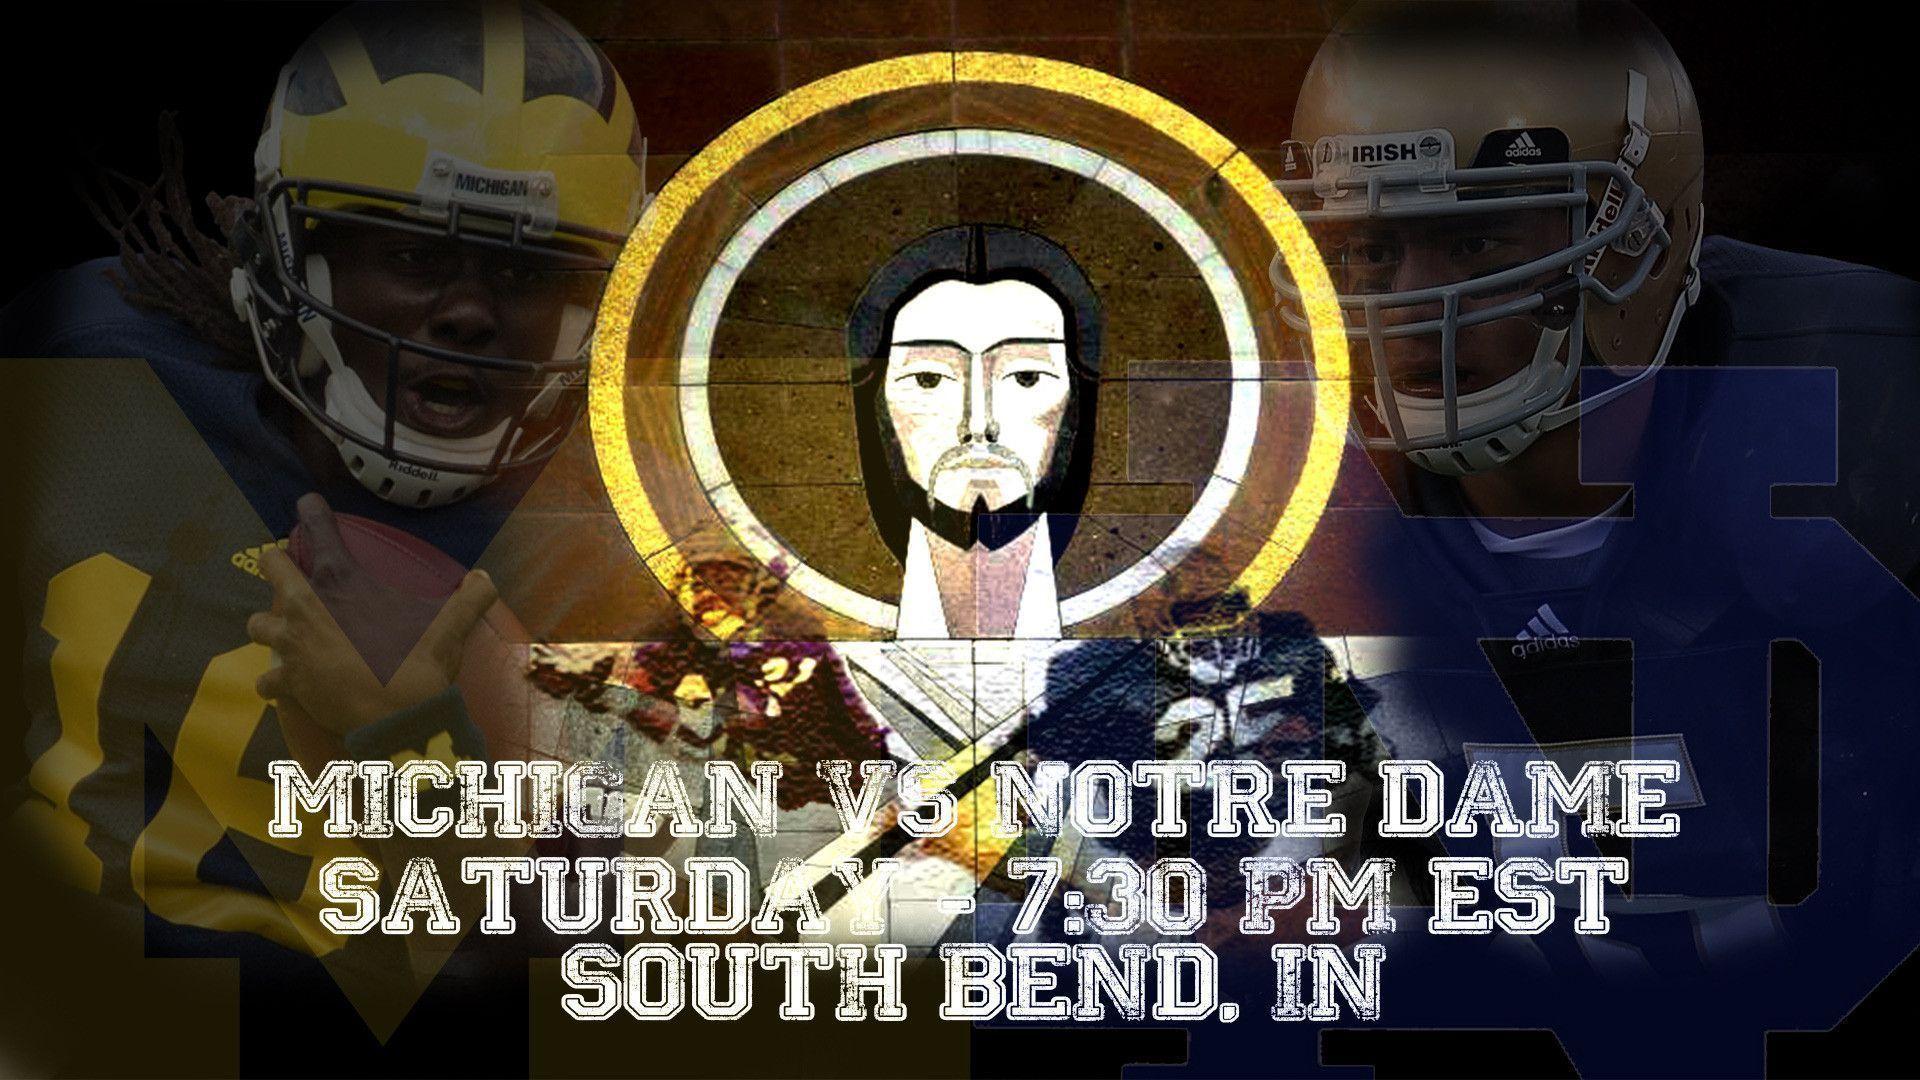 Michigan v. ND wallpaper Envy. Notre Dame Football Discussion